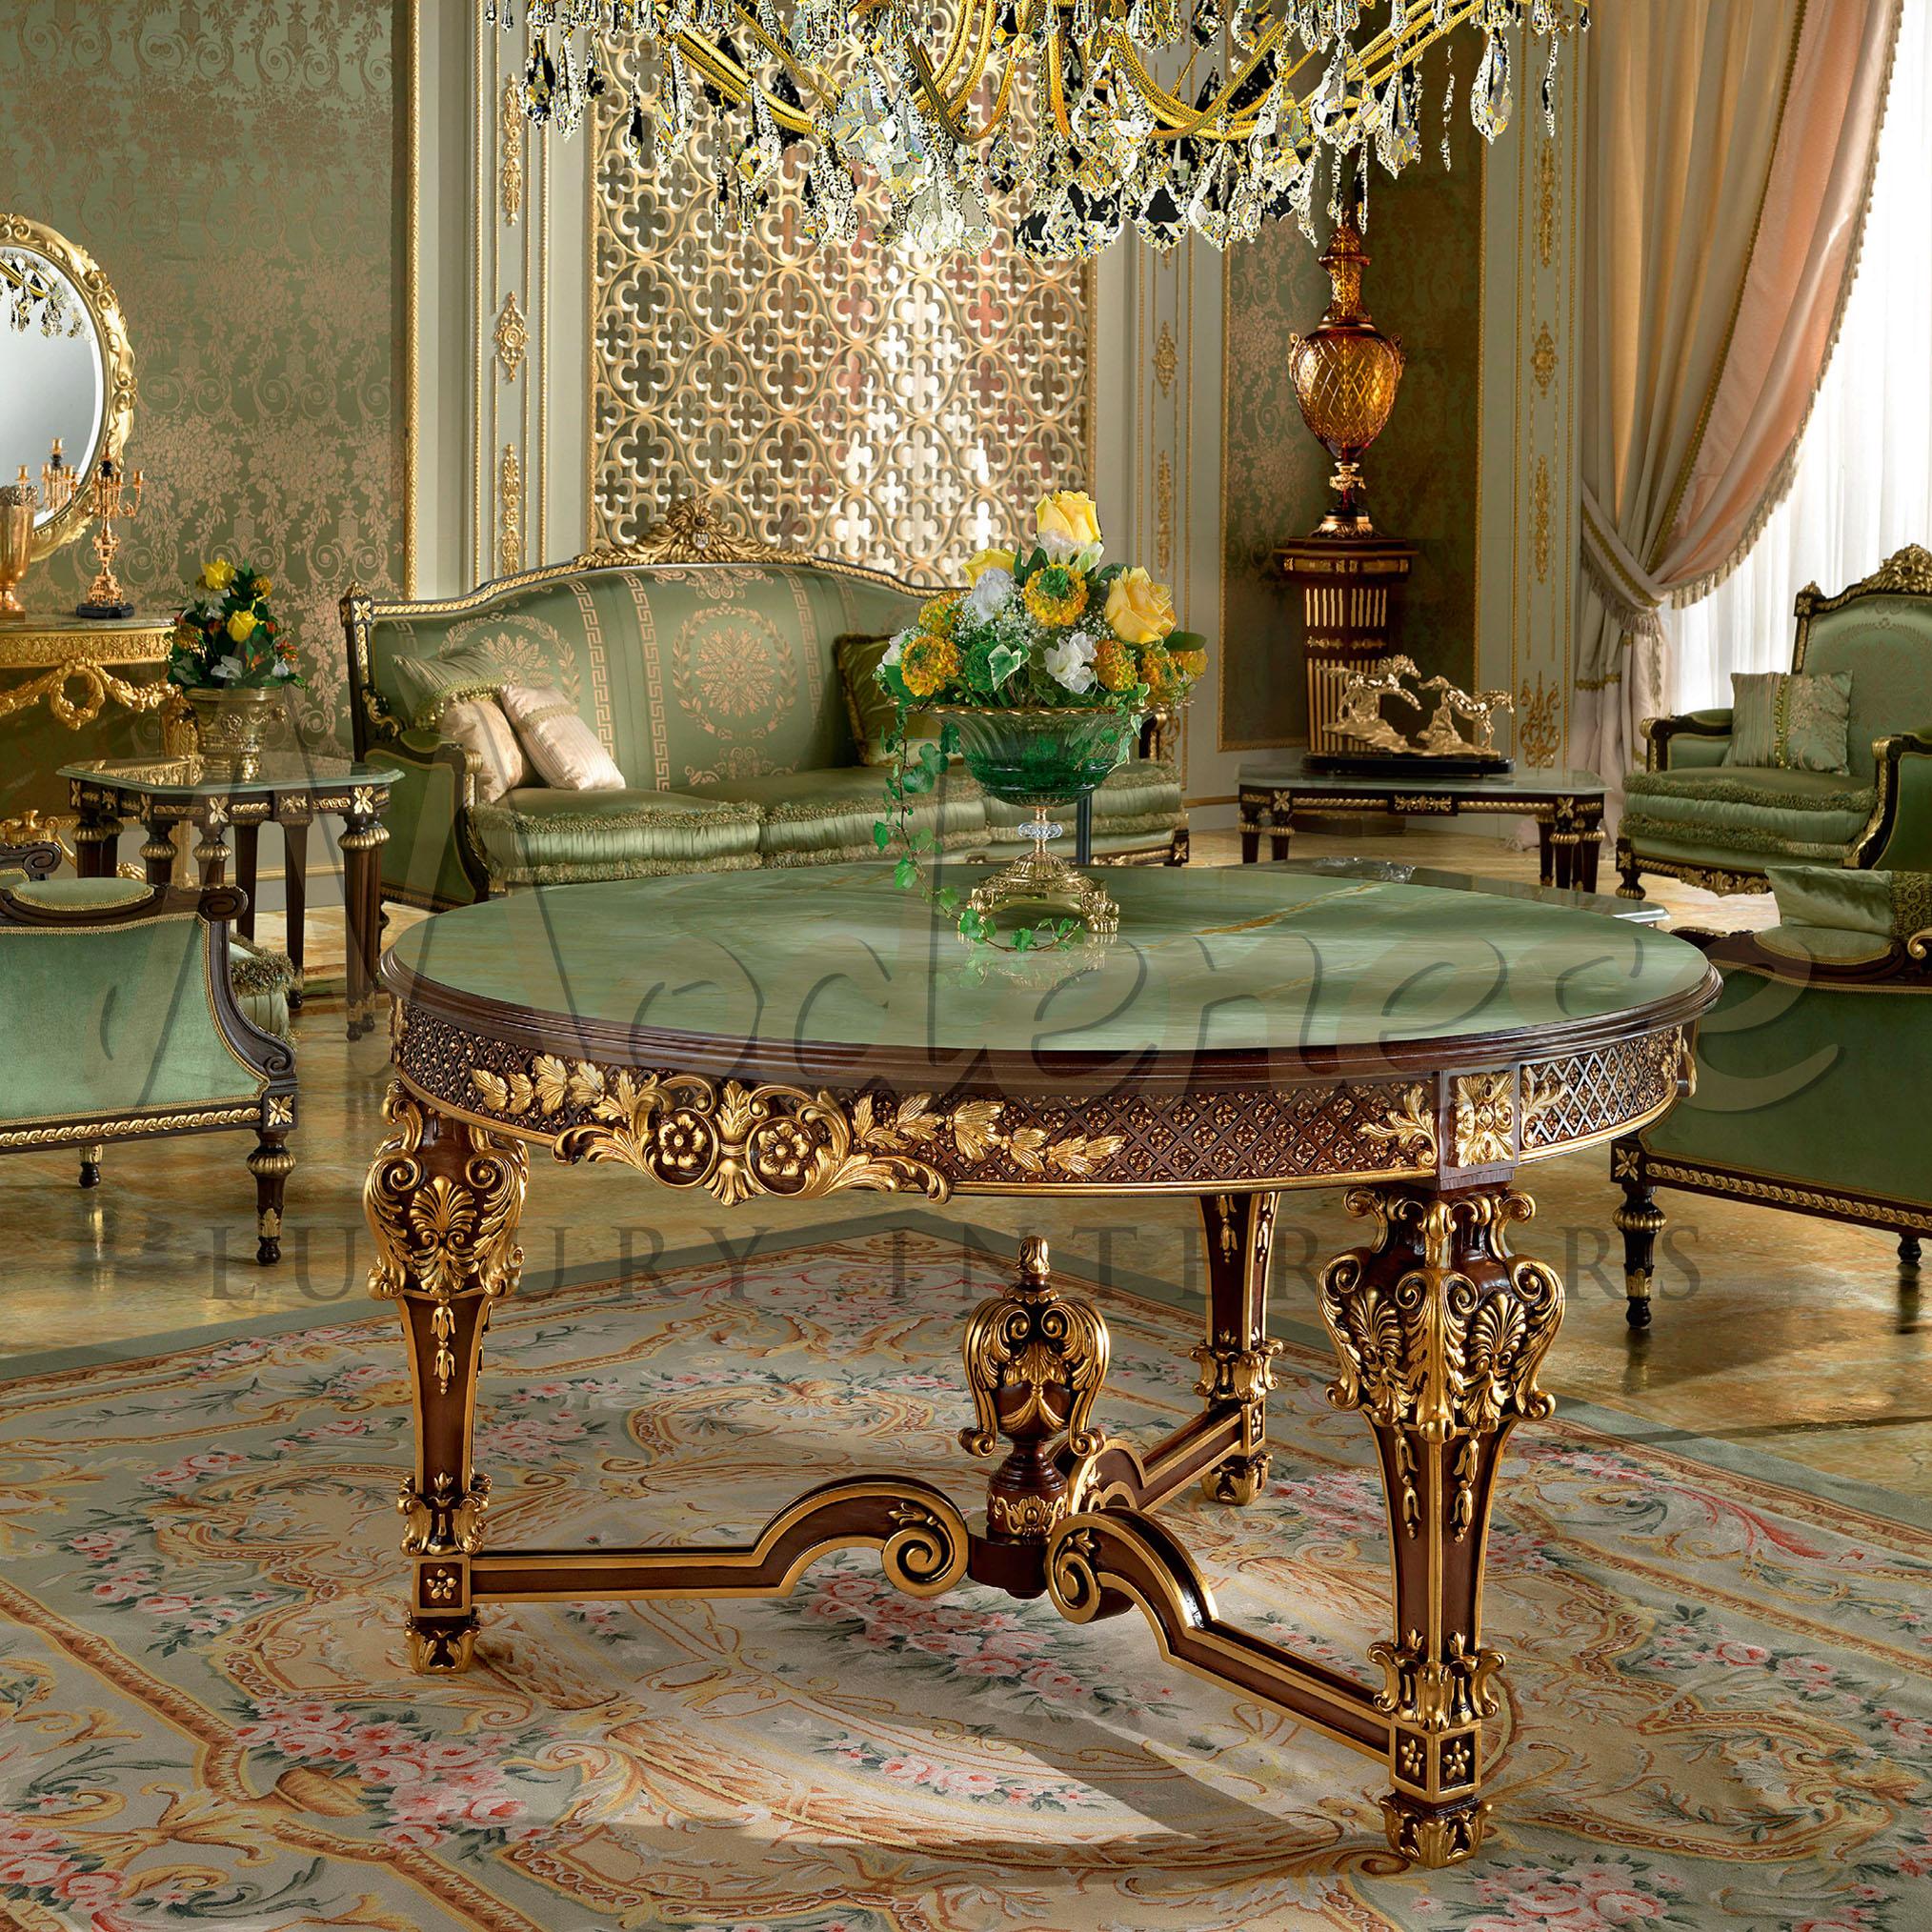 A decorative furniture item that will make the difference, this round center table is not for everyone. Afghan Green Onyx top, empire-style legs and walnut finish with gold leaf applications all over the carvings. So many secret details you can